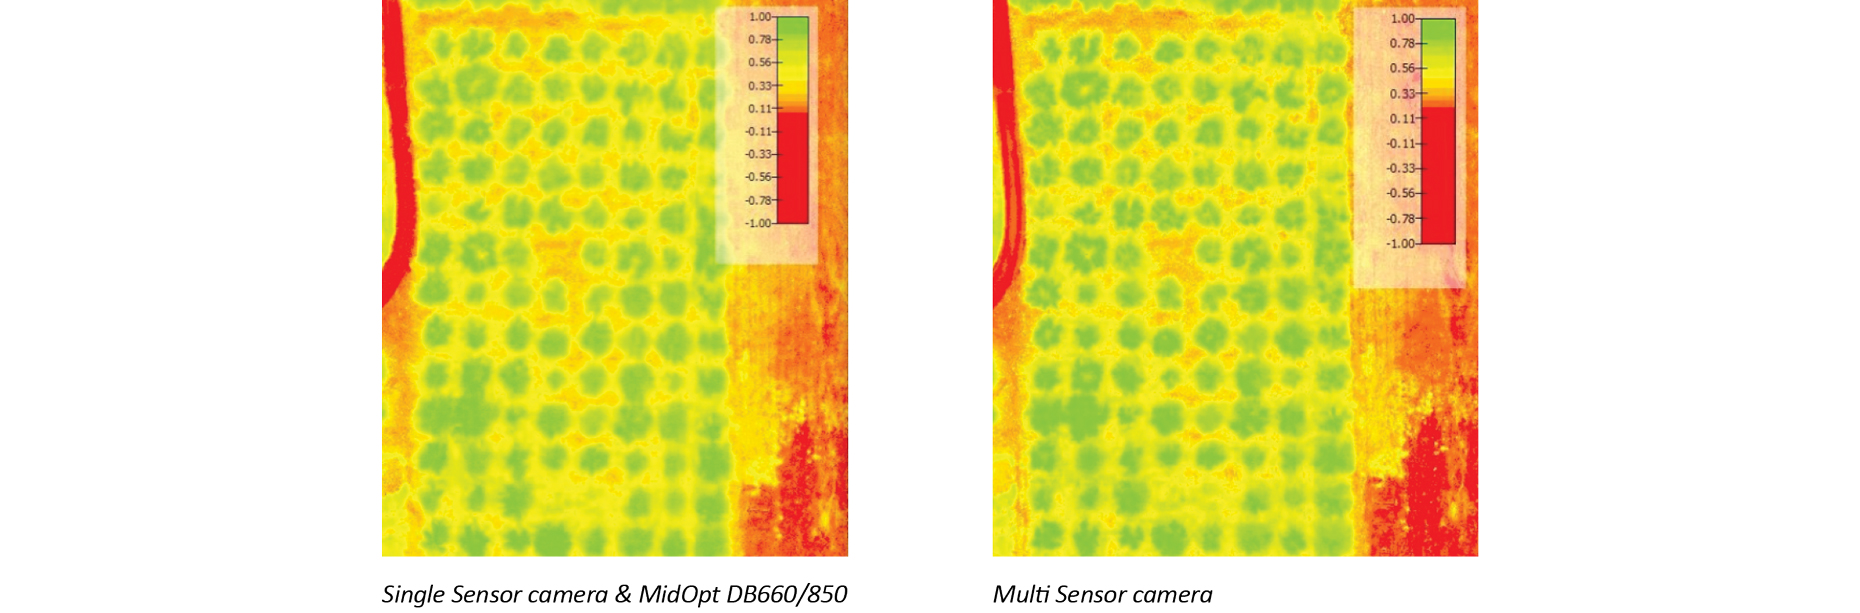 NDVI - MidOpt Dual Bandpass Filters - Multispectral Imaging - Single Spectral Imaging 